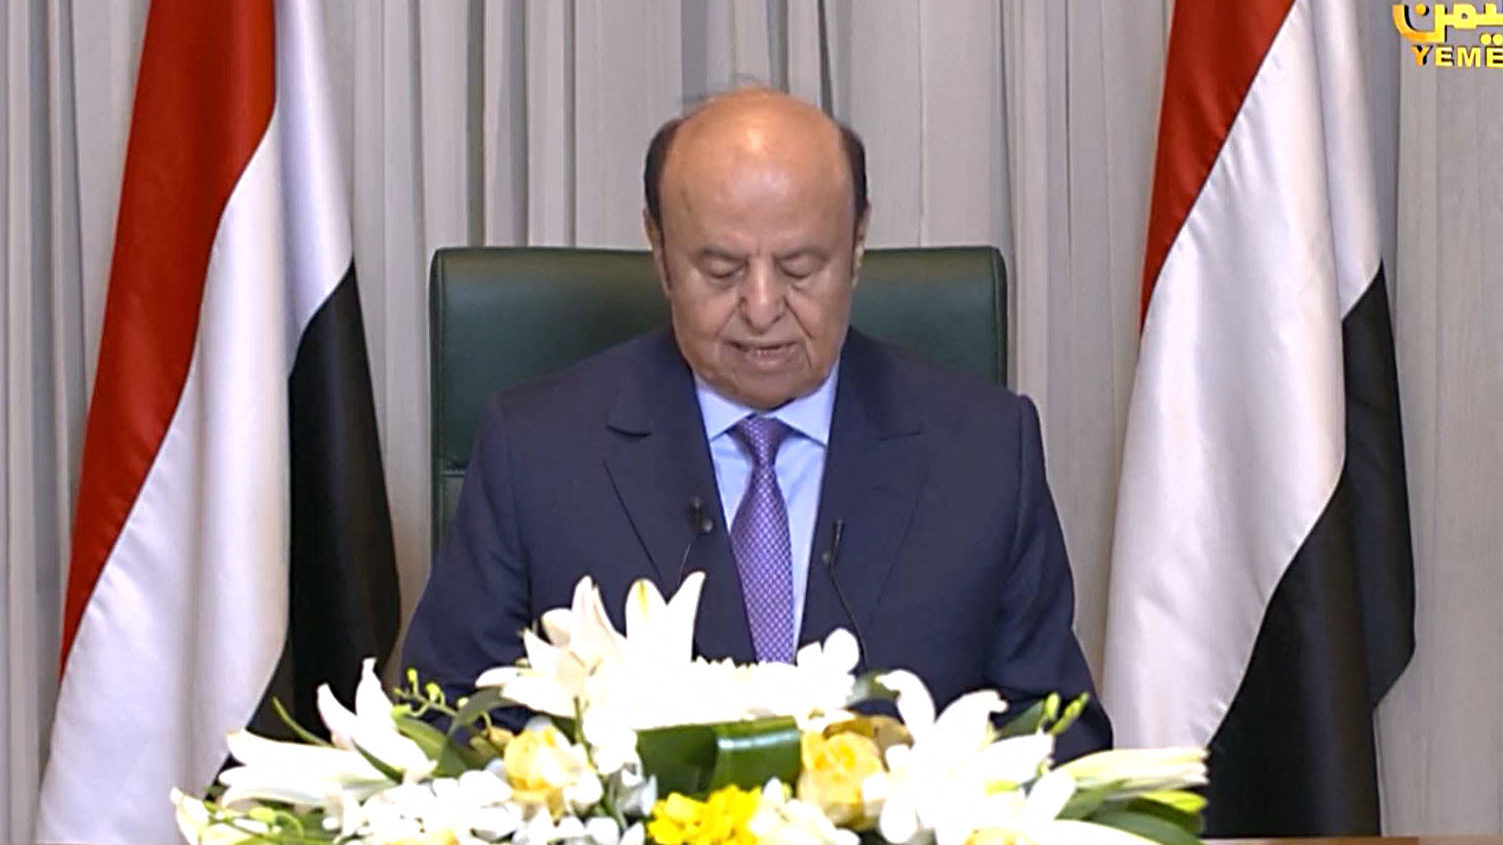 Yemen’s President Transfers Power to Leadership Council in Surprise Bid for Peace